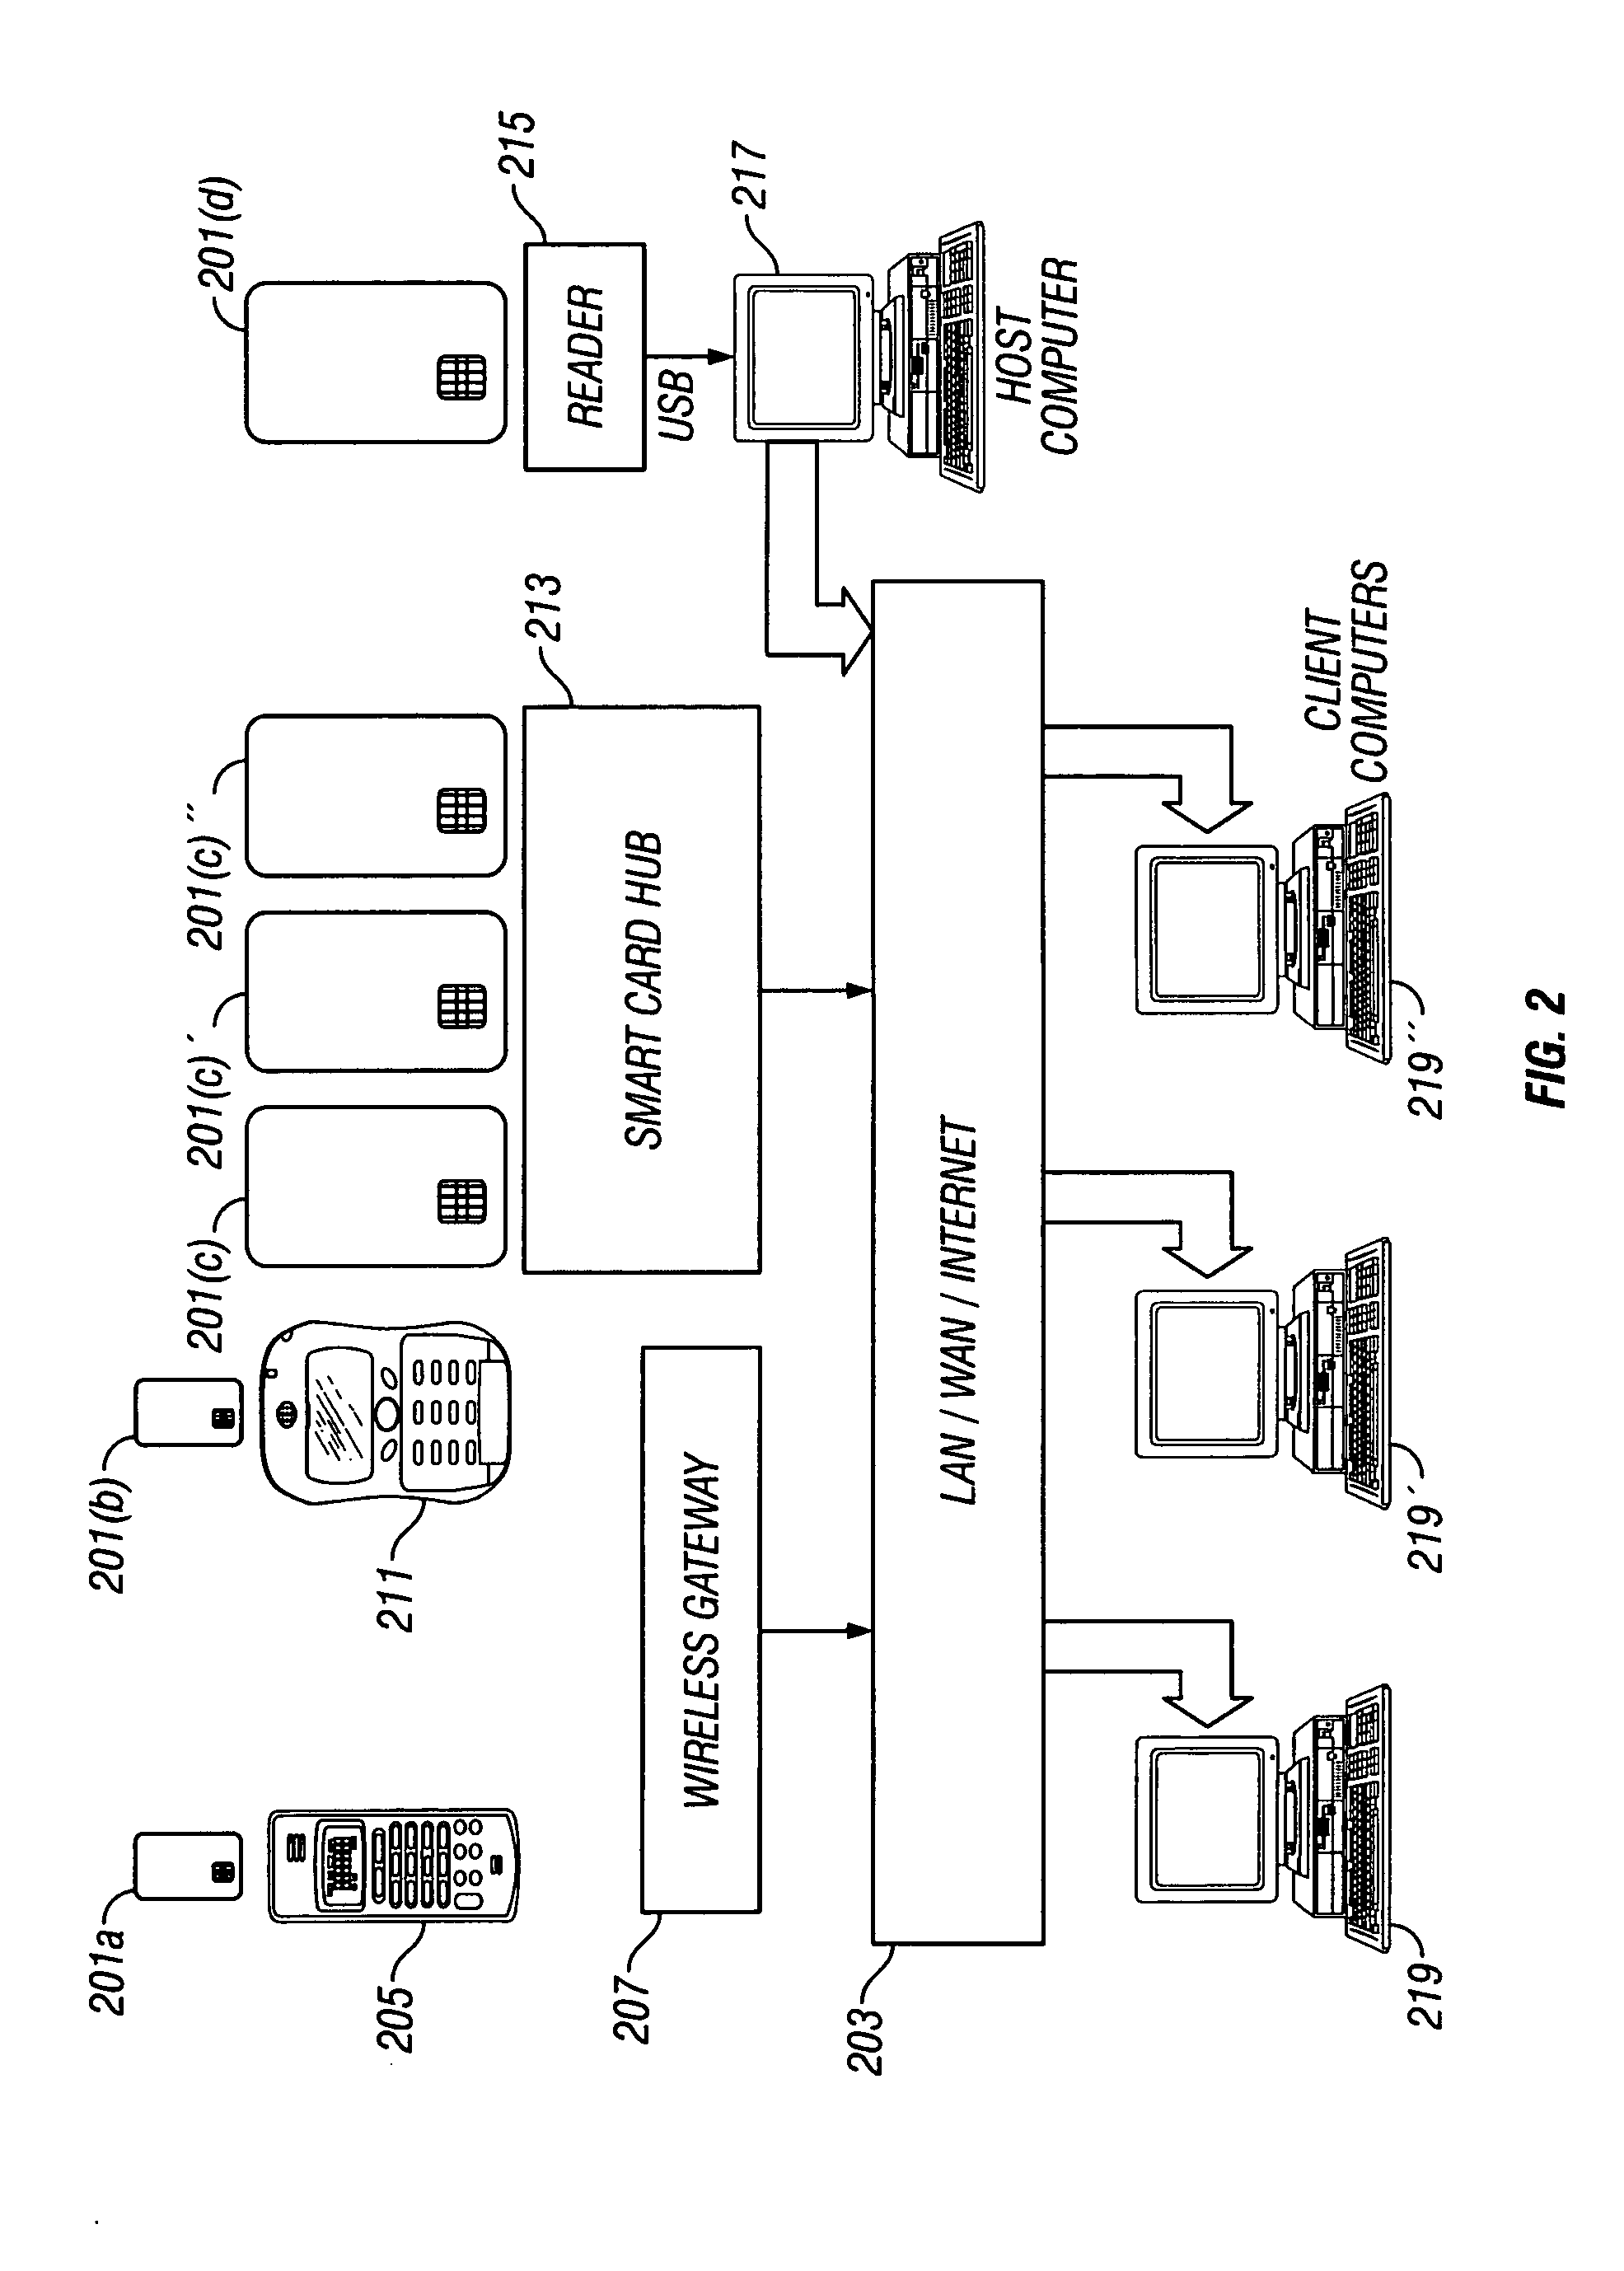 Secure networking using a resource-constrained device